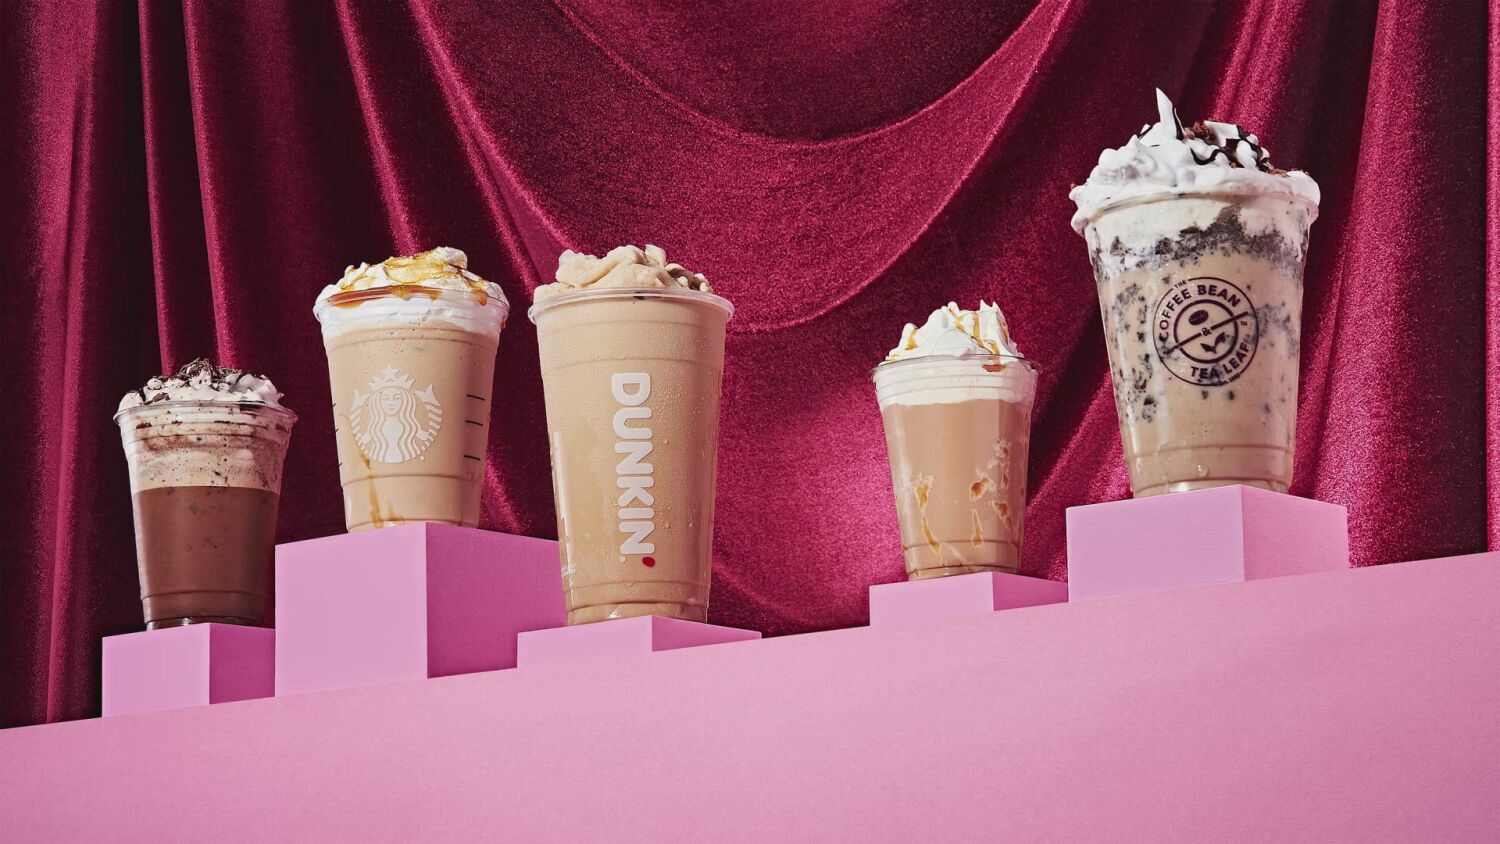 Starbucks, Dunkin' and more: Who has the best frozen coffee drink?